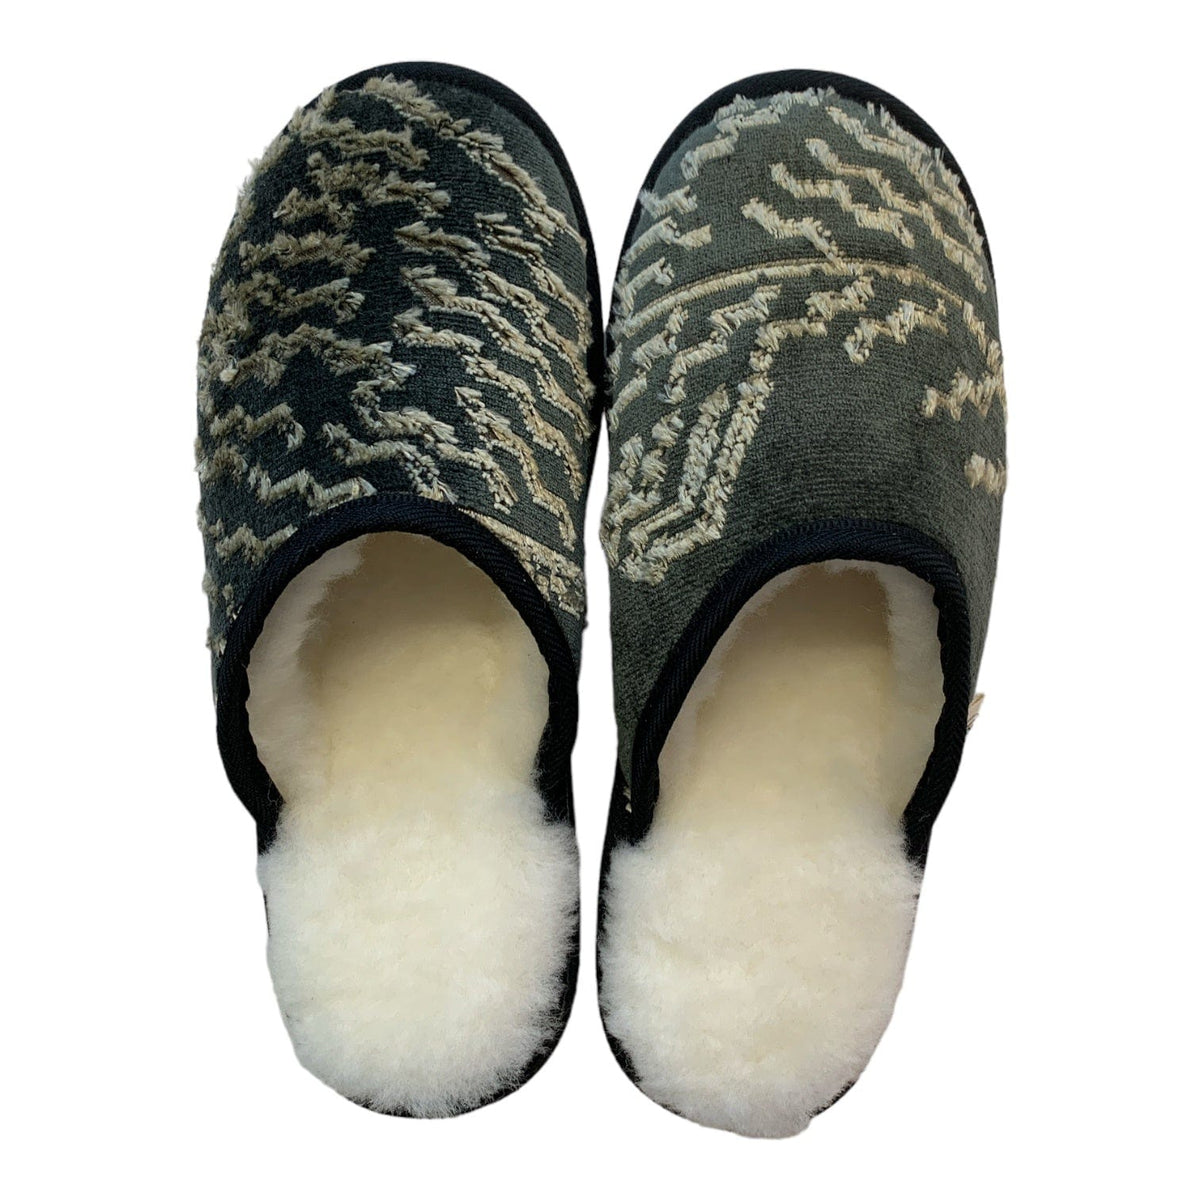 Tiger Mountain large white slippers little and fox.jpg